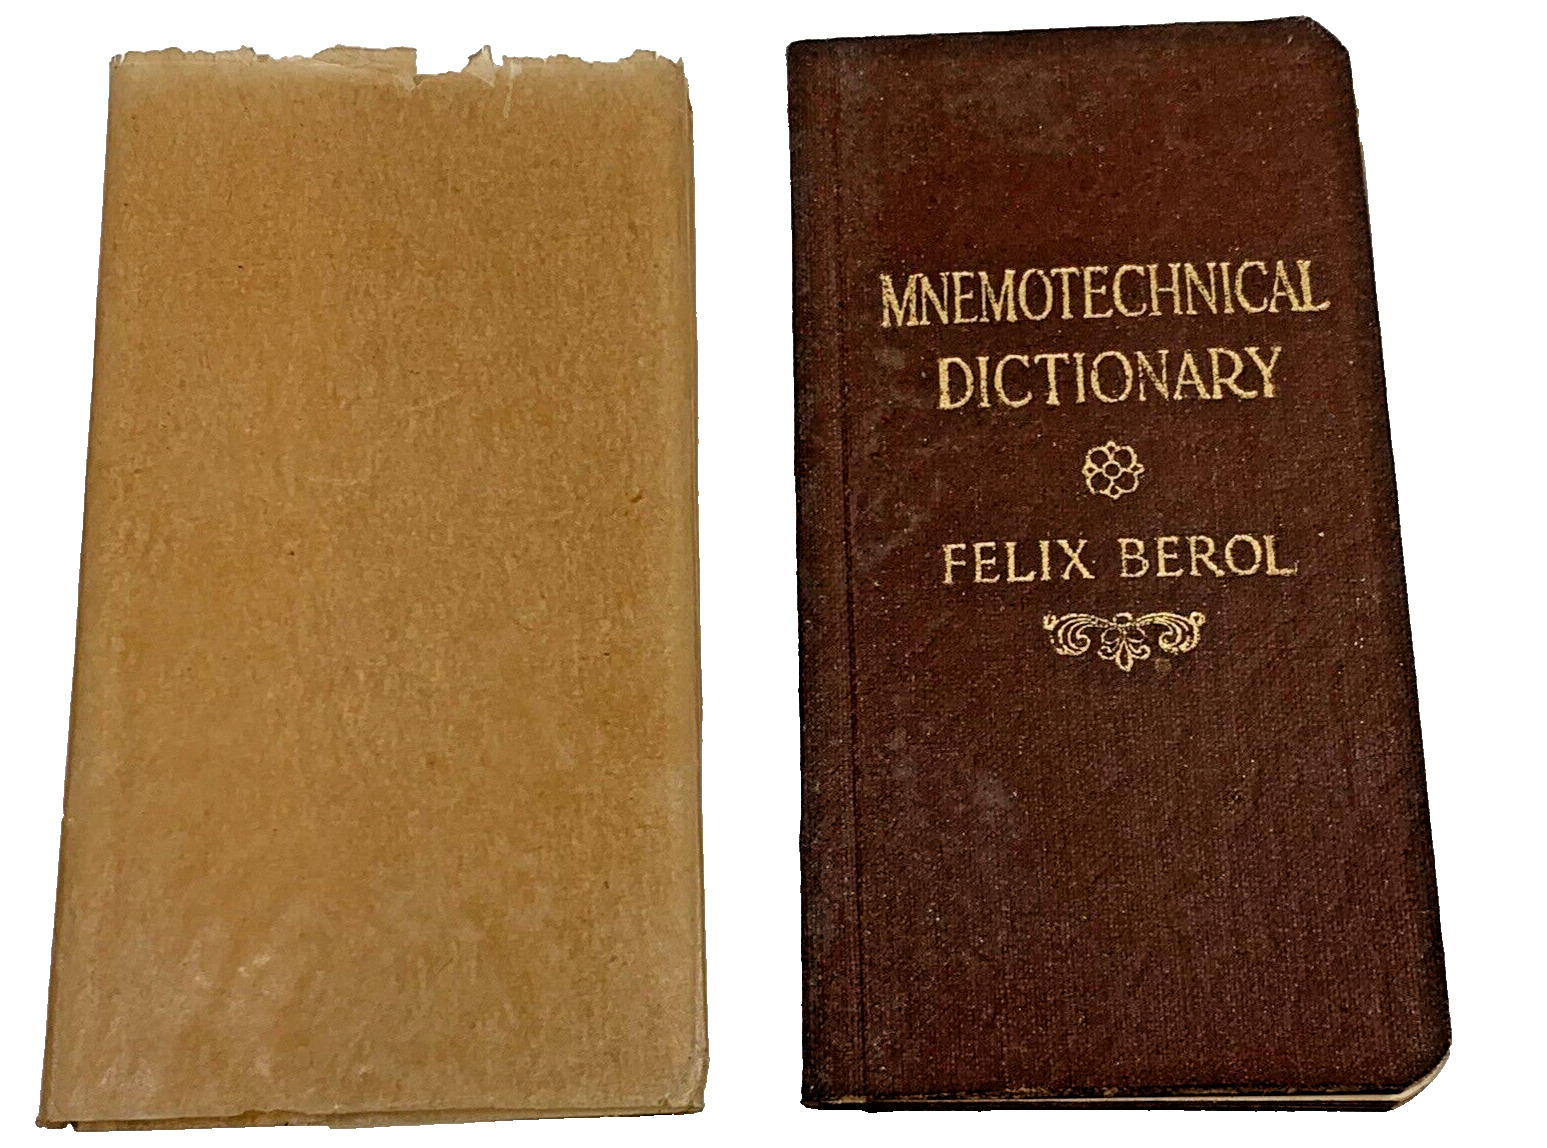 EXTREMELY RARE 1913 Mnemotechnical Dictionary by Felix Berol - 1st Edition VHTF